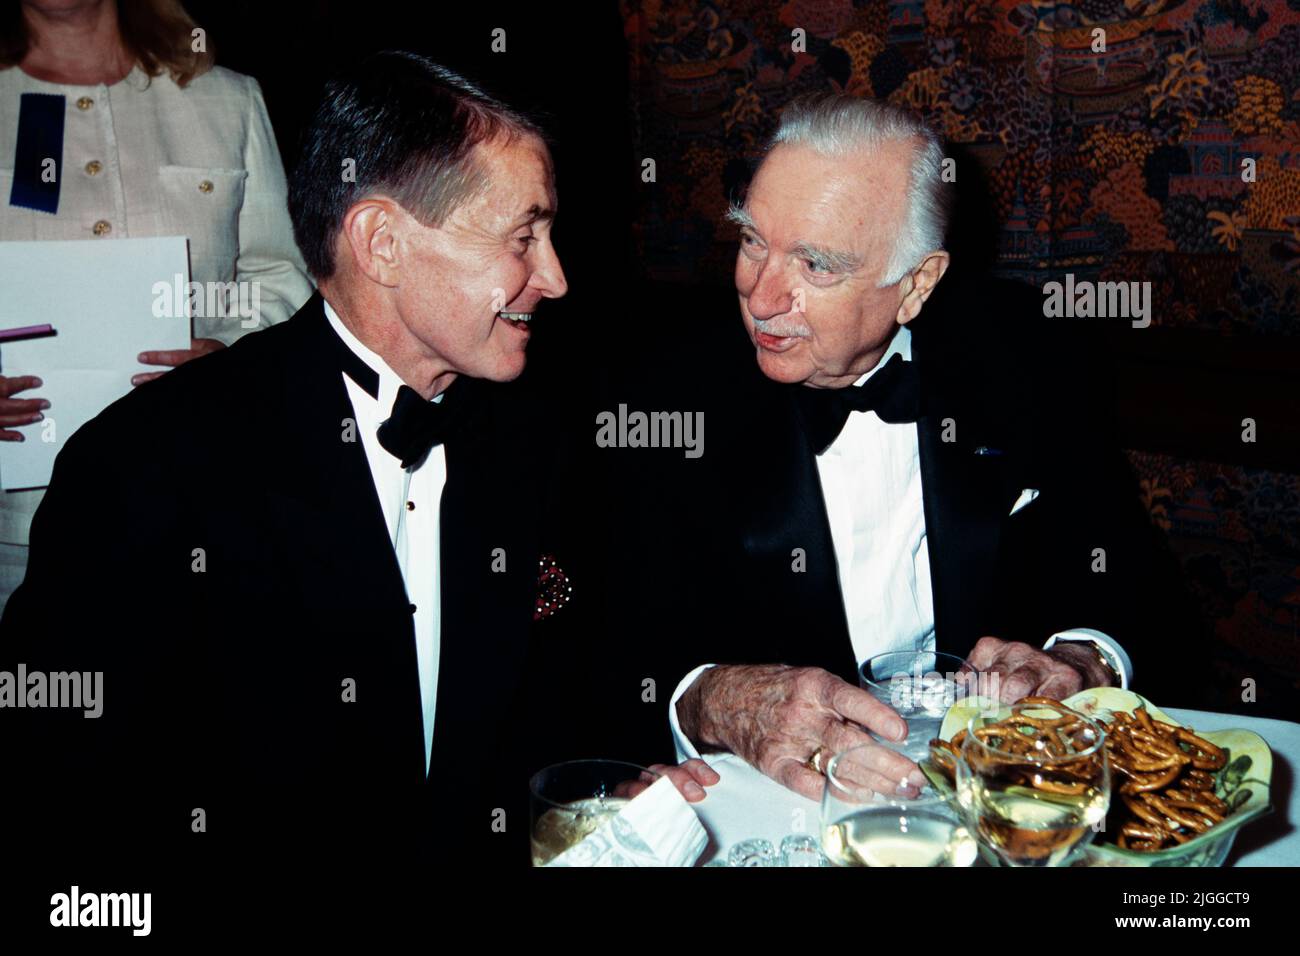 Legendary television news anchor Walter Cronkite, right, chats with CBS White House correspondent Bill Plante, left, during the American News Women’s Club annual Roast and Toast Dinner at the Four Seasons Hotel, May 13, 1997 in Washington, D.C. Cronkite was presented with the Excellence in Journalism Award during the event. Stock Photo